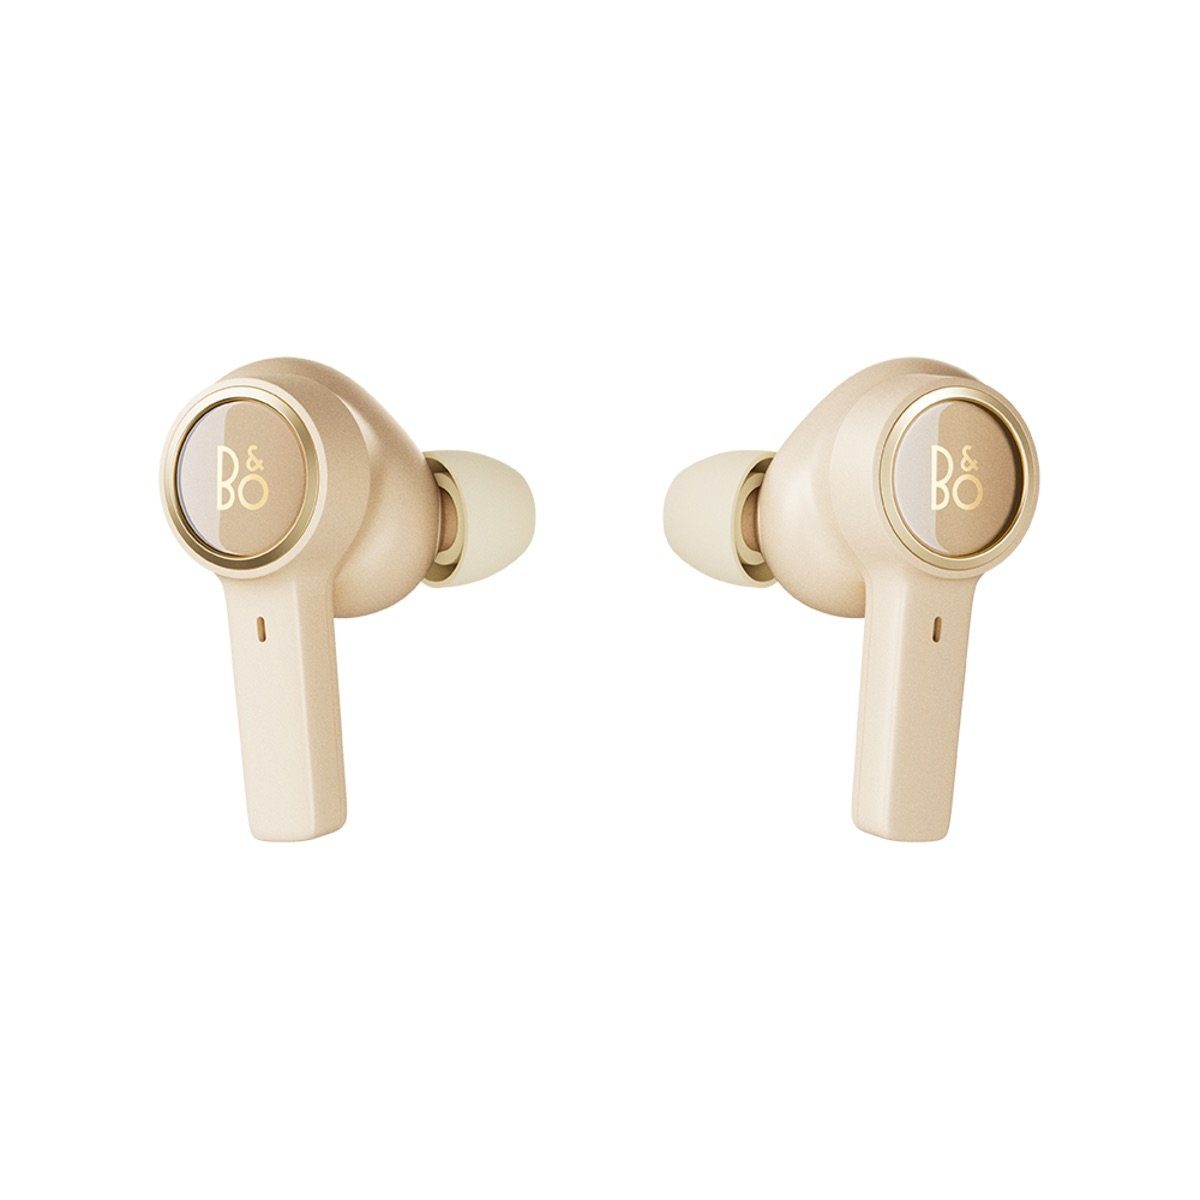 Bang & Olufsen Noise Active In-Ear-Kopfhörer Cancellation) EX wireless (Adaptive Tone Gold Beoplay